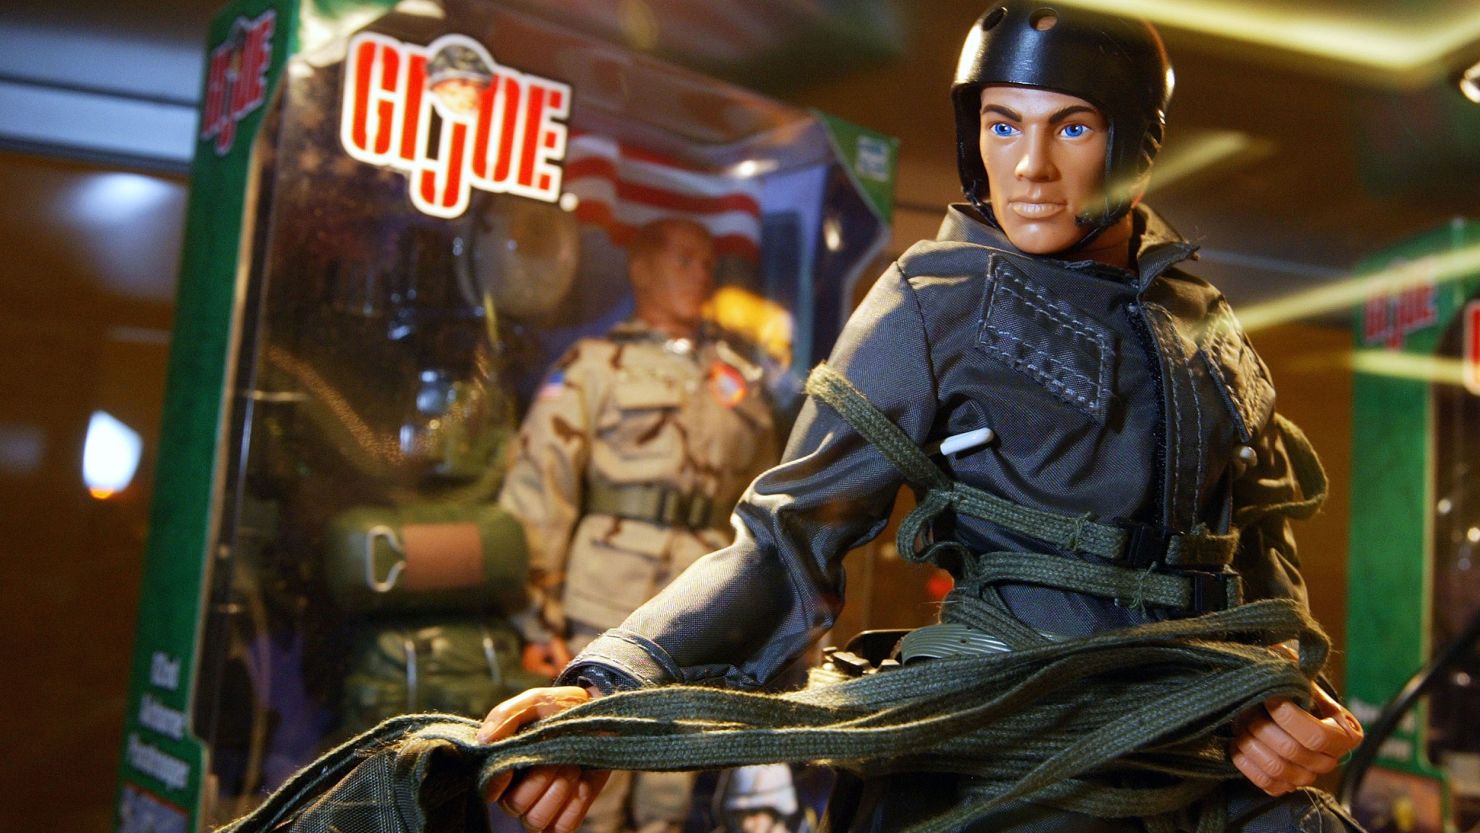 This month, the famous all-American action figure G.I. Joe celebrates the 60th anniversary of its deployment.